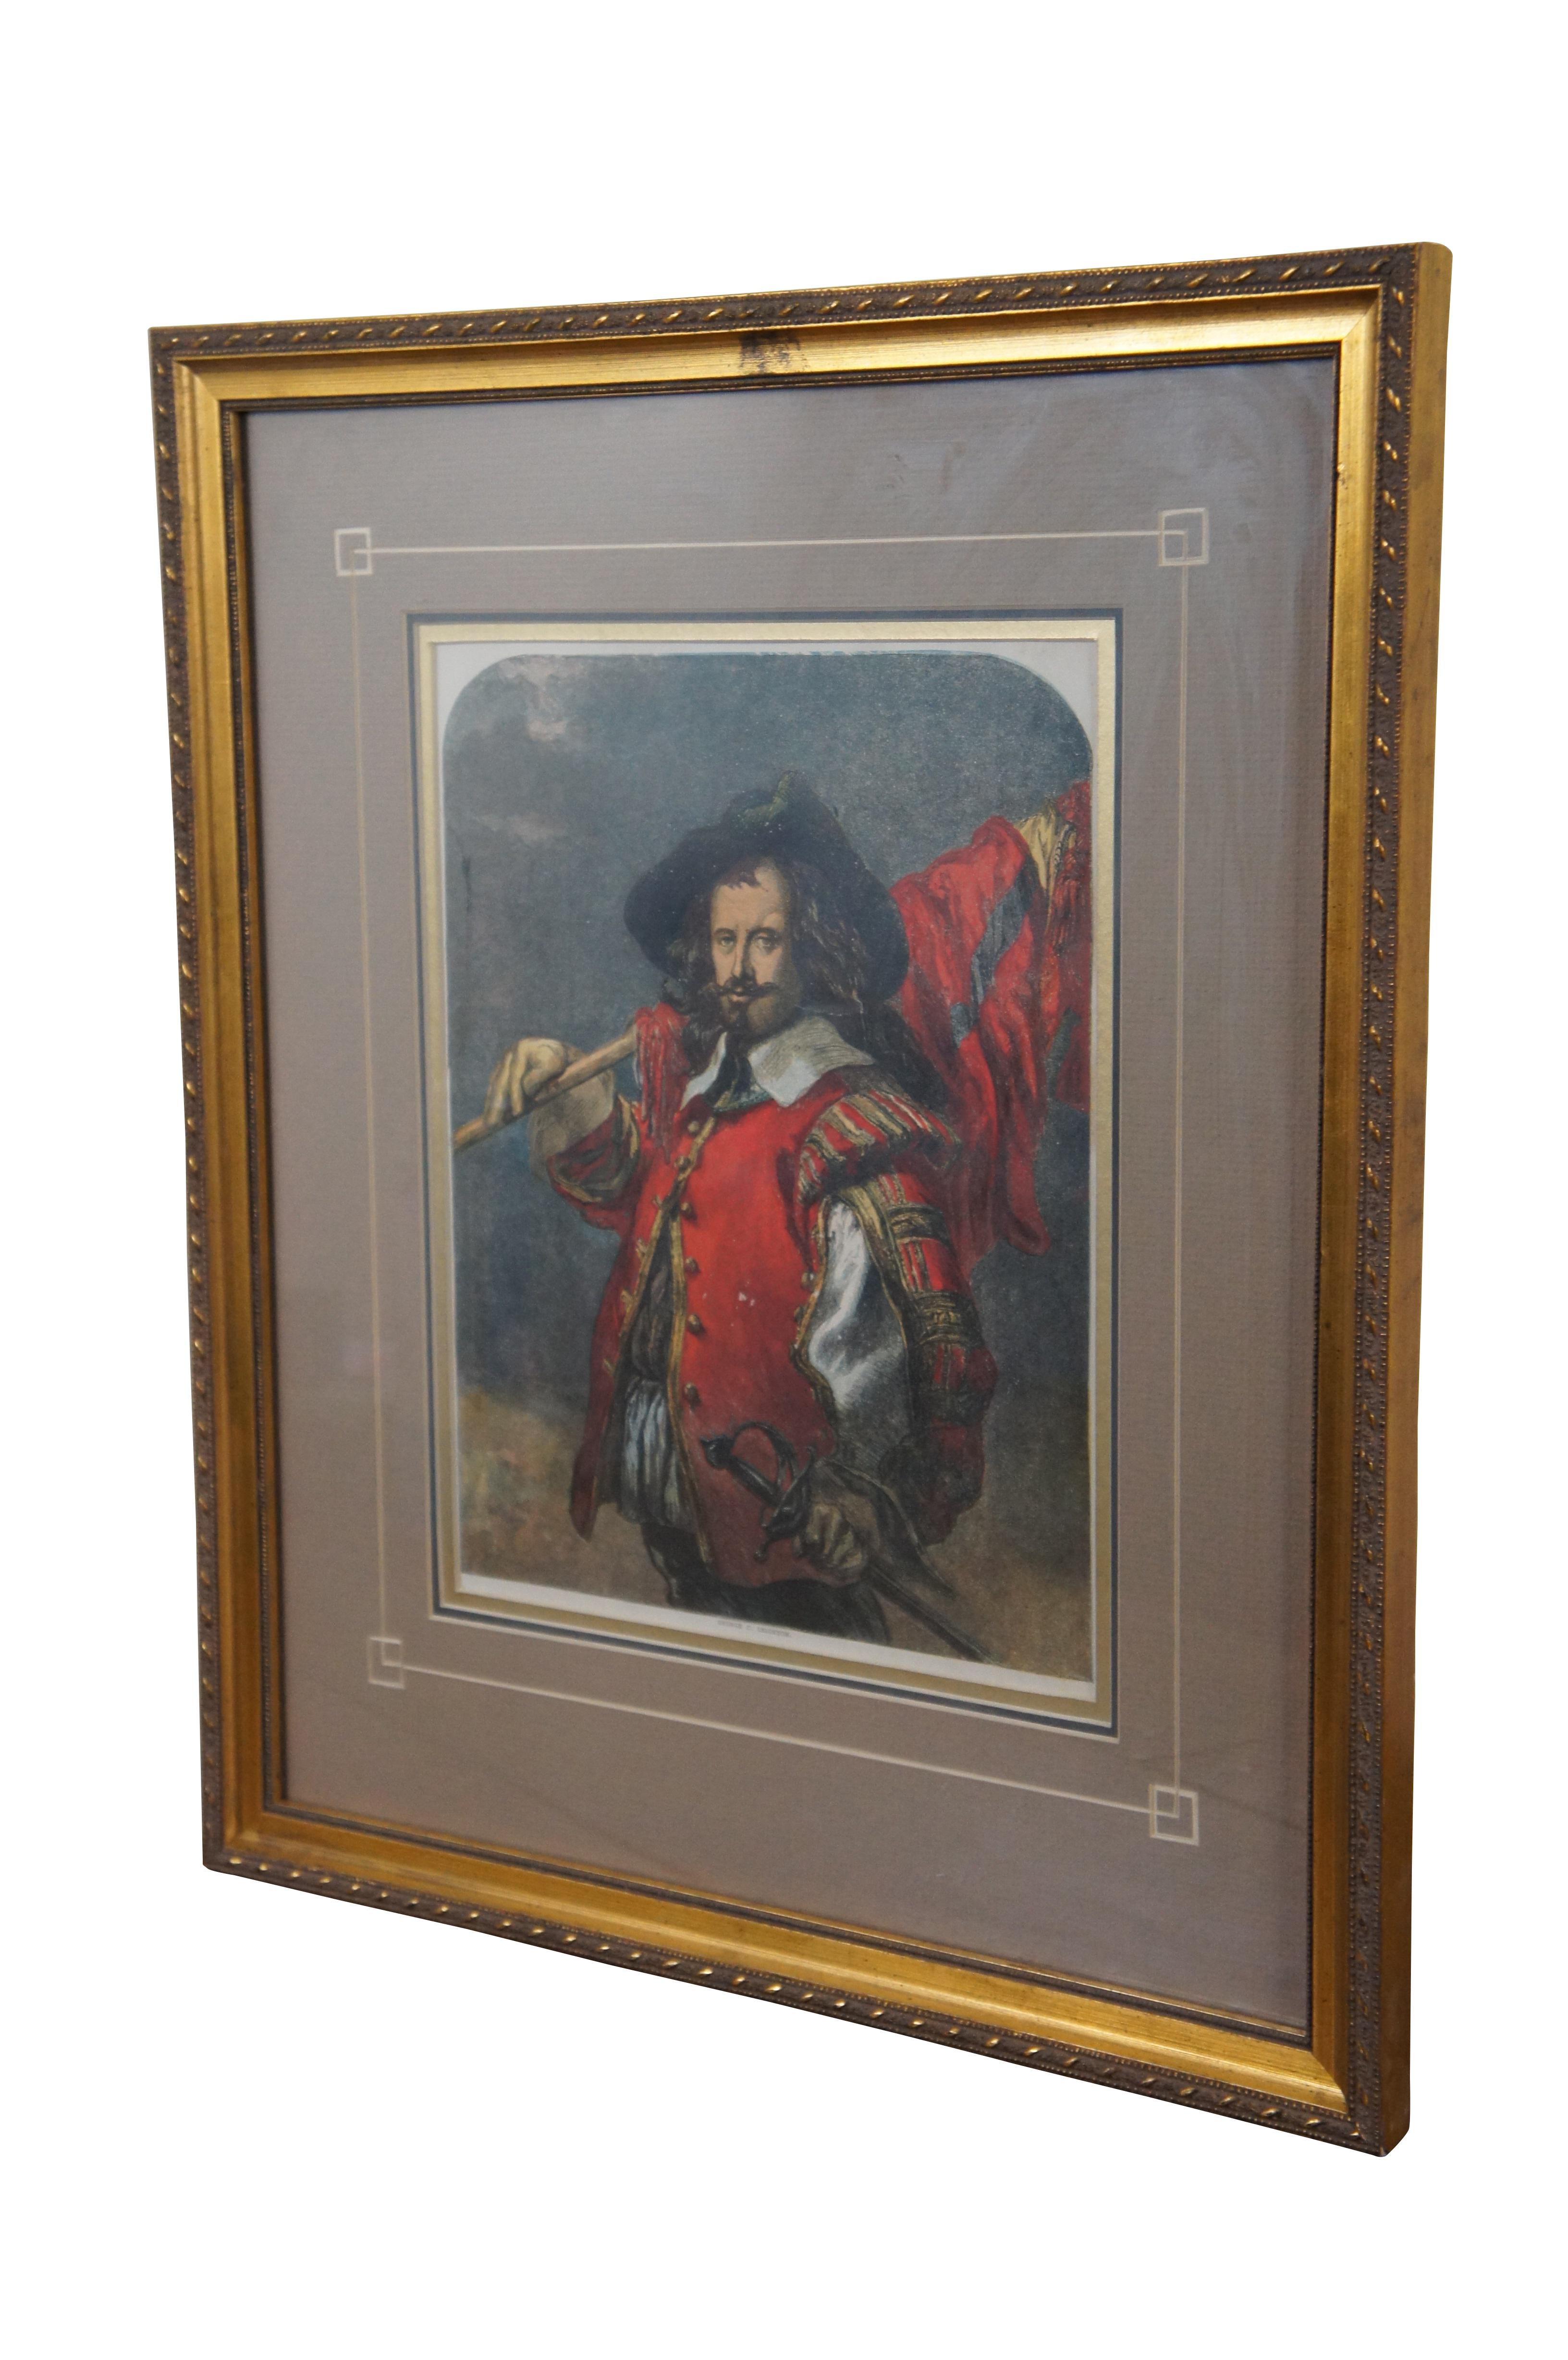 Framed mid 19th century hand colored engraving depicting a Cavalier / Musketeer holding s staff with flag.  Titled 